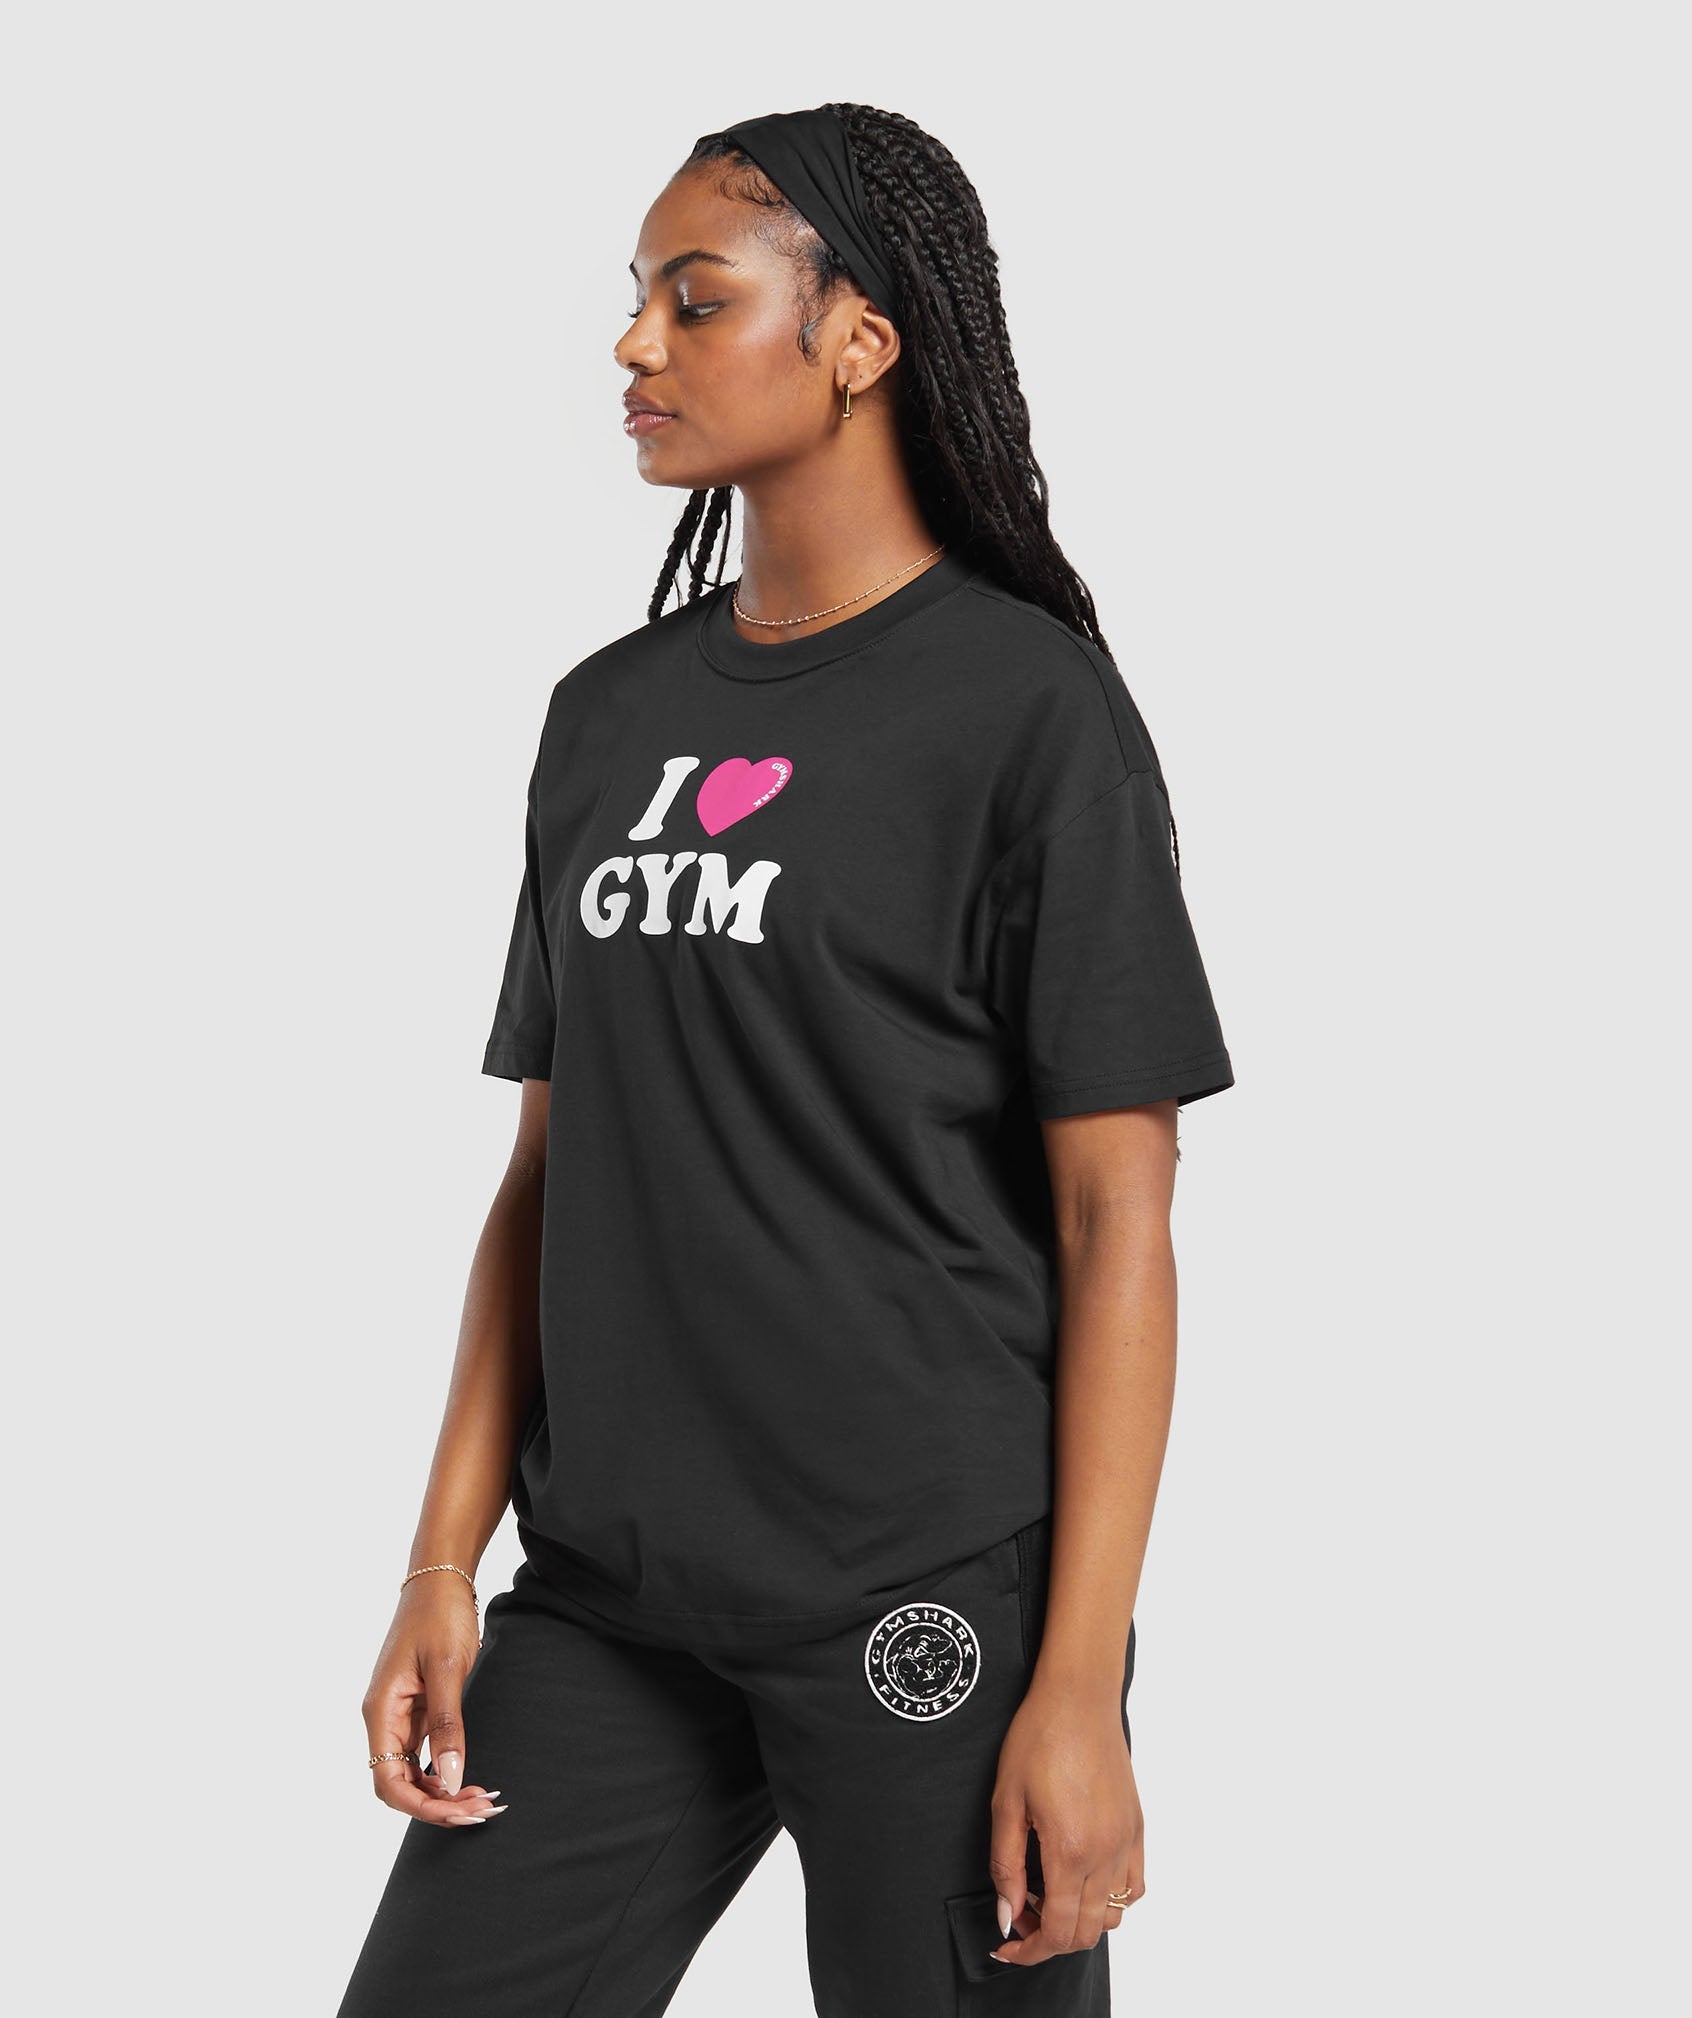 I Heart Gym Oversized T-Shirt in Black - view 3